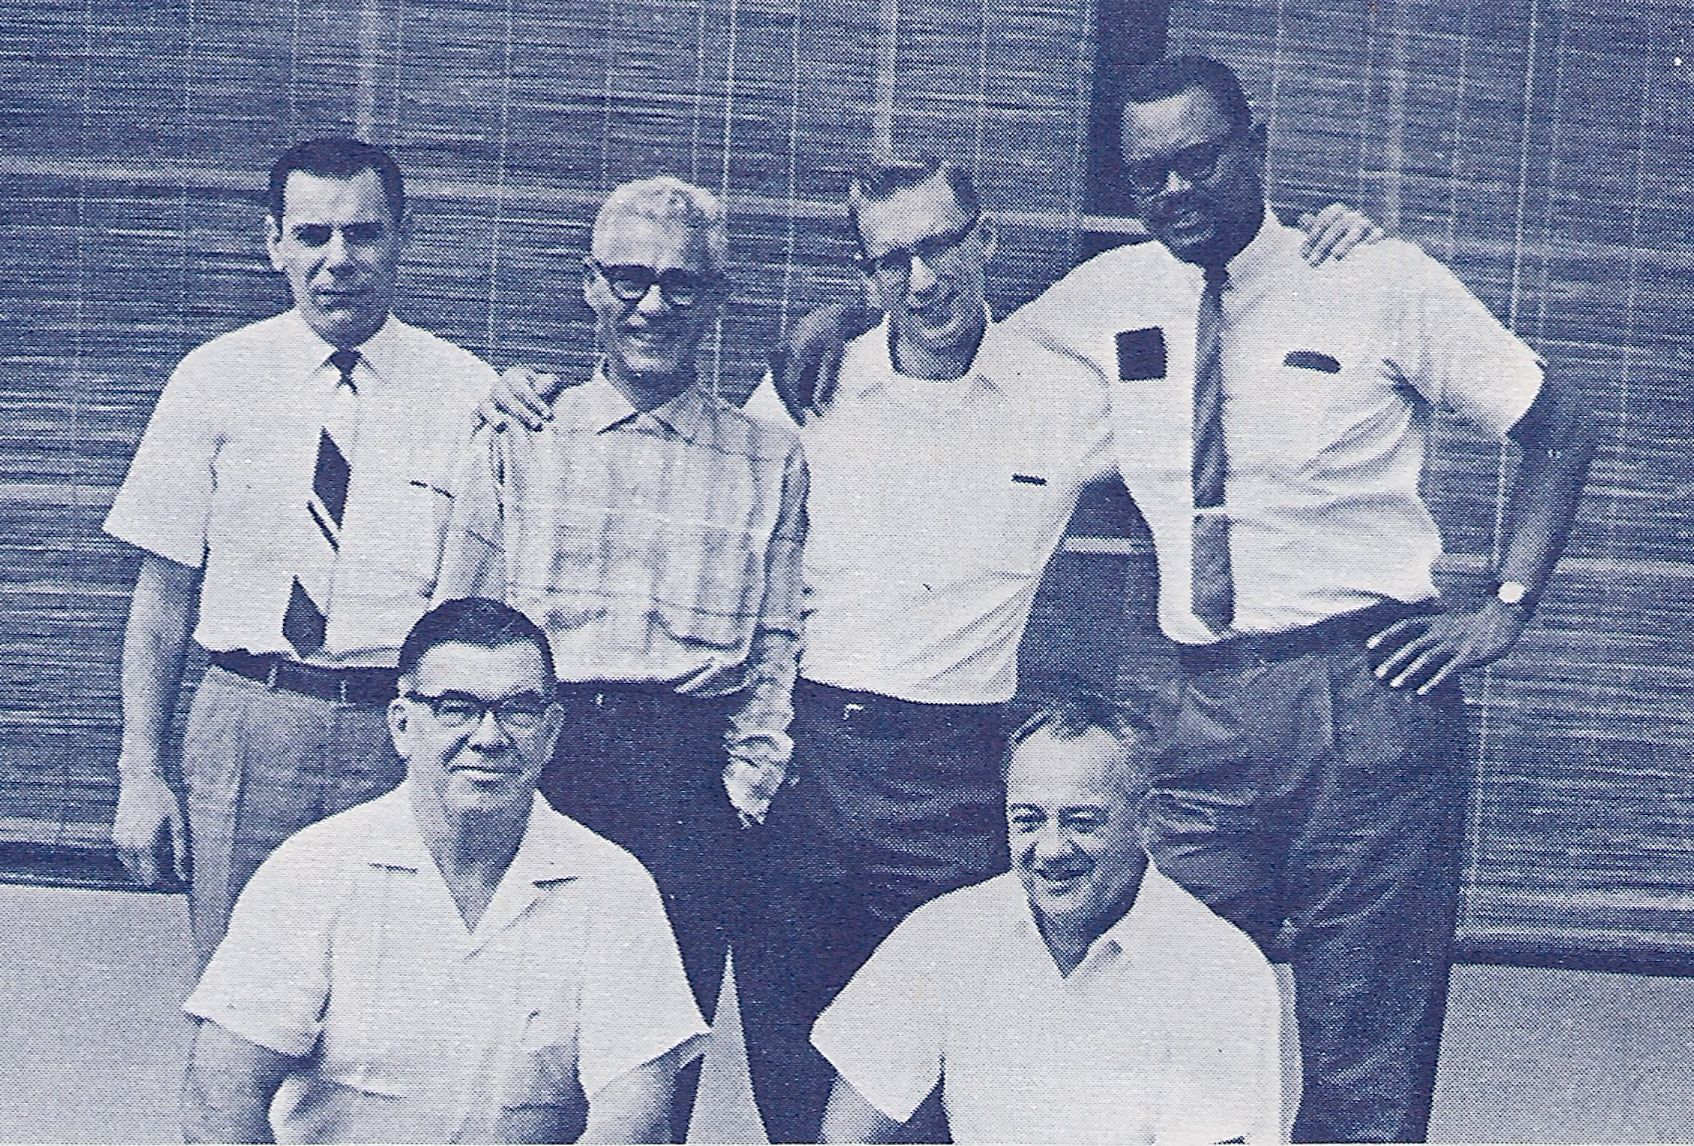 USAID/Customs men at a reunion. Front row: George Roberts, Saigon; Arthur E. Ouellette, Laos. Back row: Walter J. Pardaen, Senior Customs Representative, Paris-on special assignment in Saigon; William Shaw, James Foster and Ernest Bennet, all Laos. (Customs Today, May 1966)